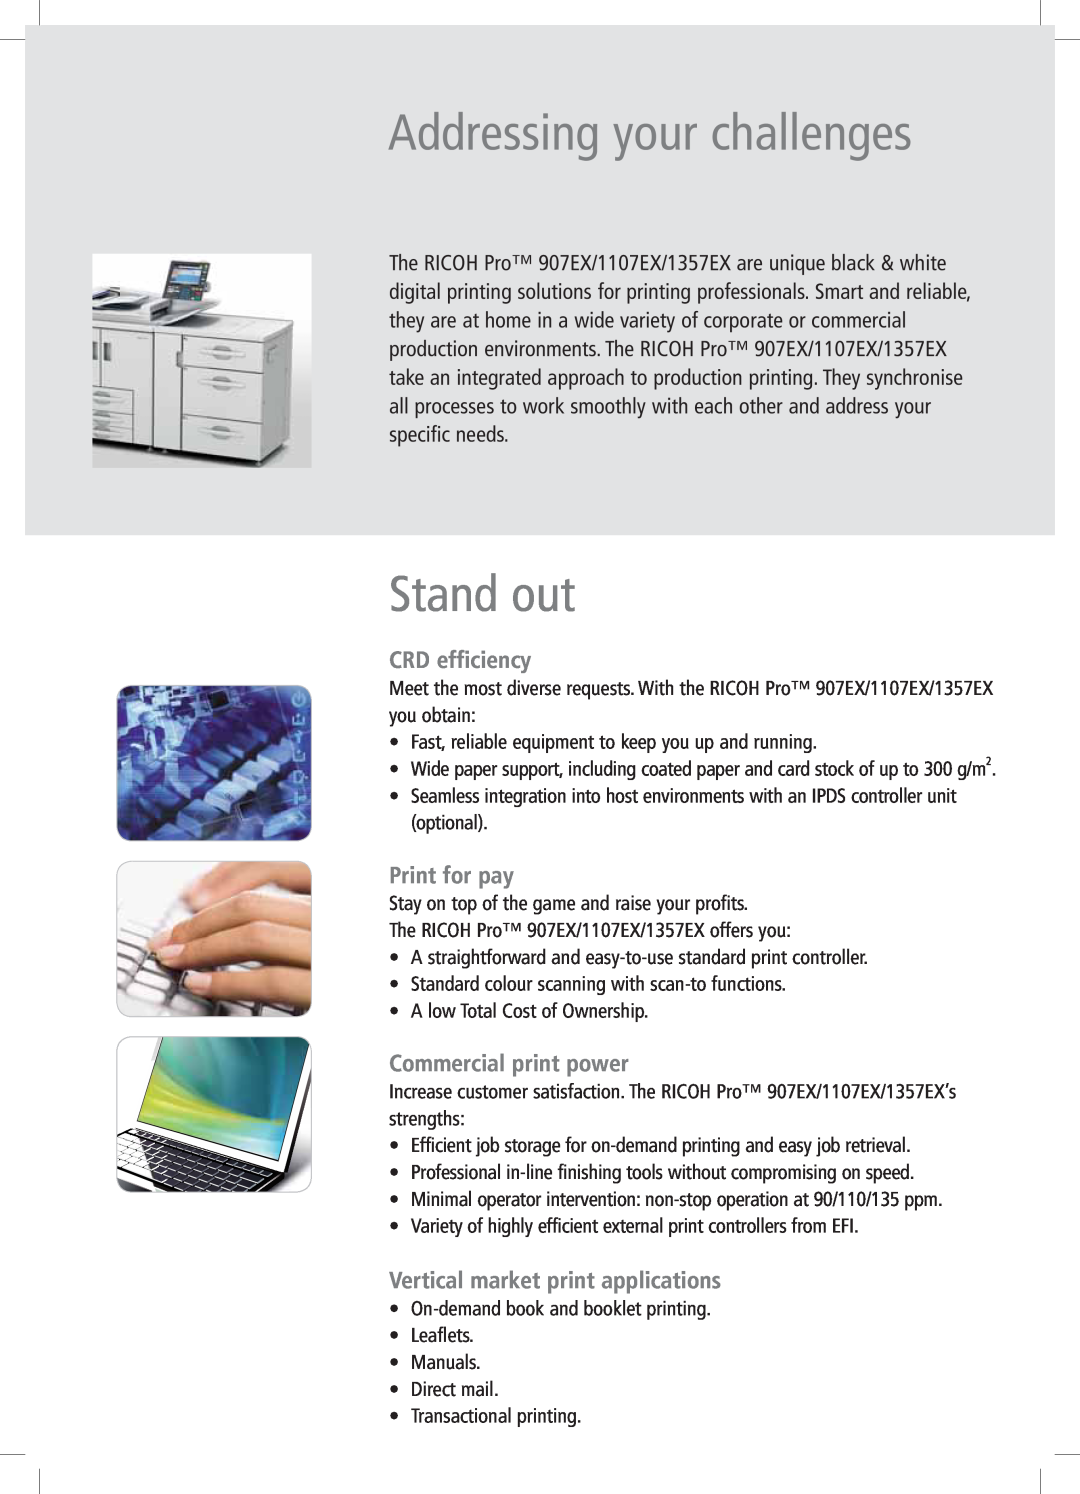 Ricoh 1107EX, 907EX, 1357EX Addressing your challenges, Stand out, CRD efficiency, Print for pay, Commercial print power 